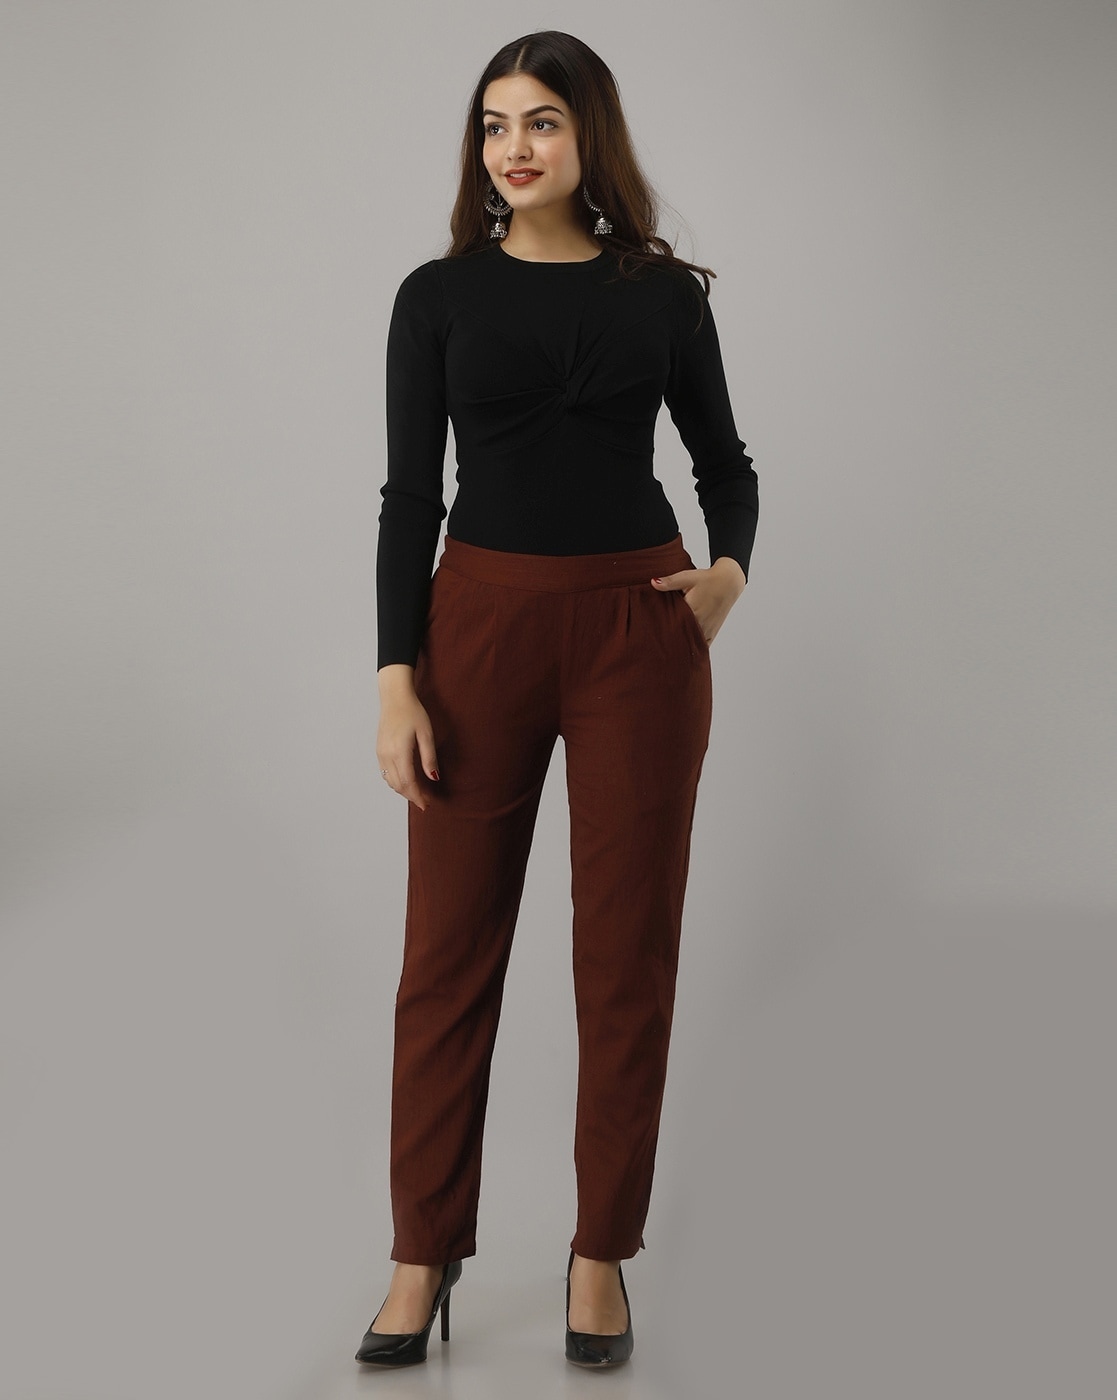 Popwings Casual Chocolate Brown Solid Self Design Relaxed Trousers For Women  at Rs 210/piece in New Delhi